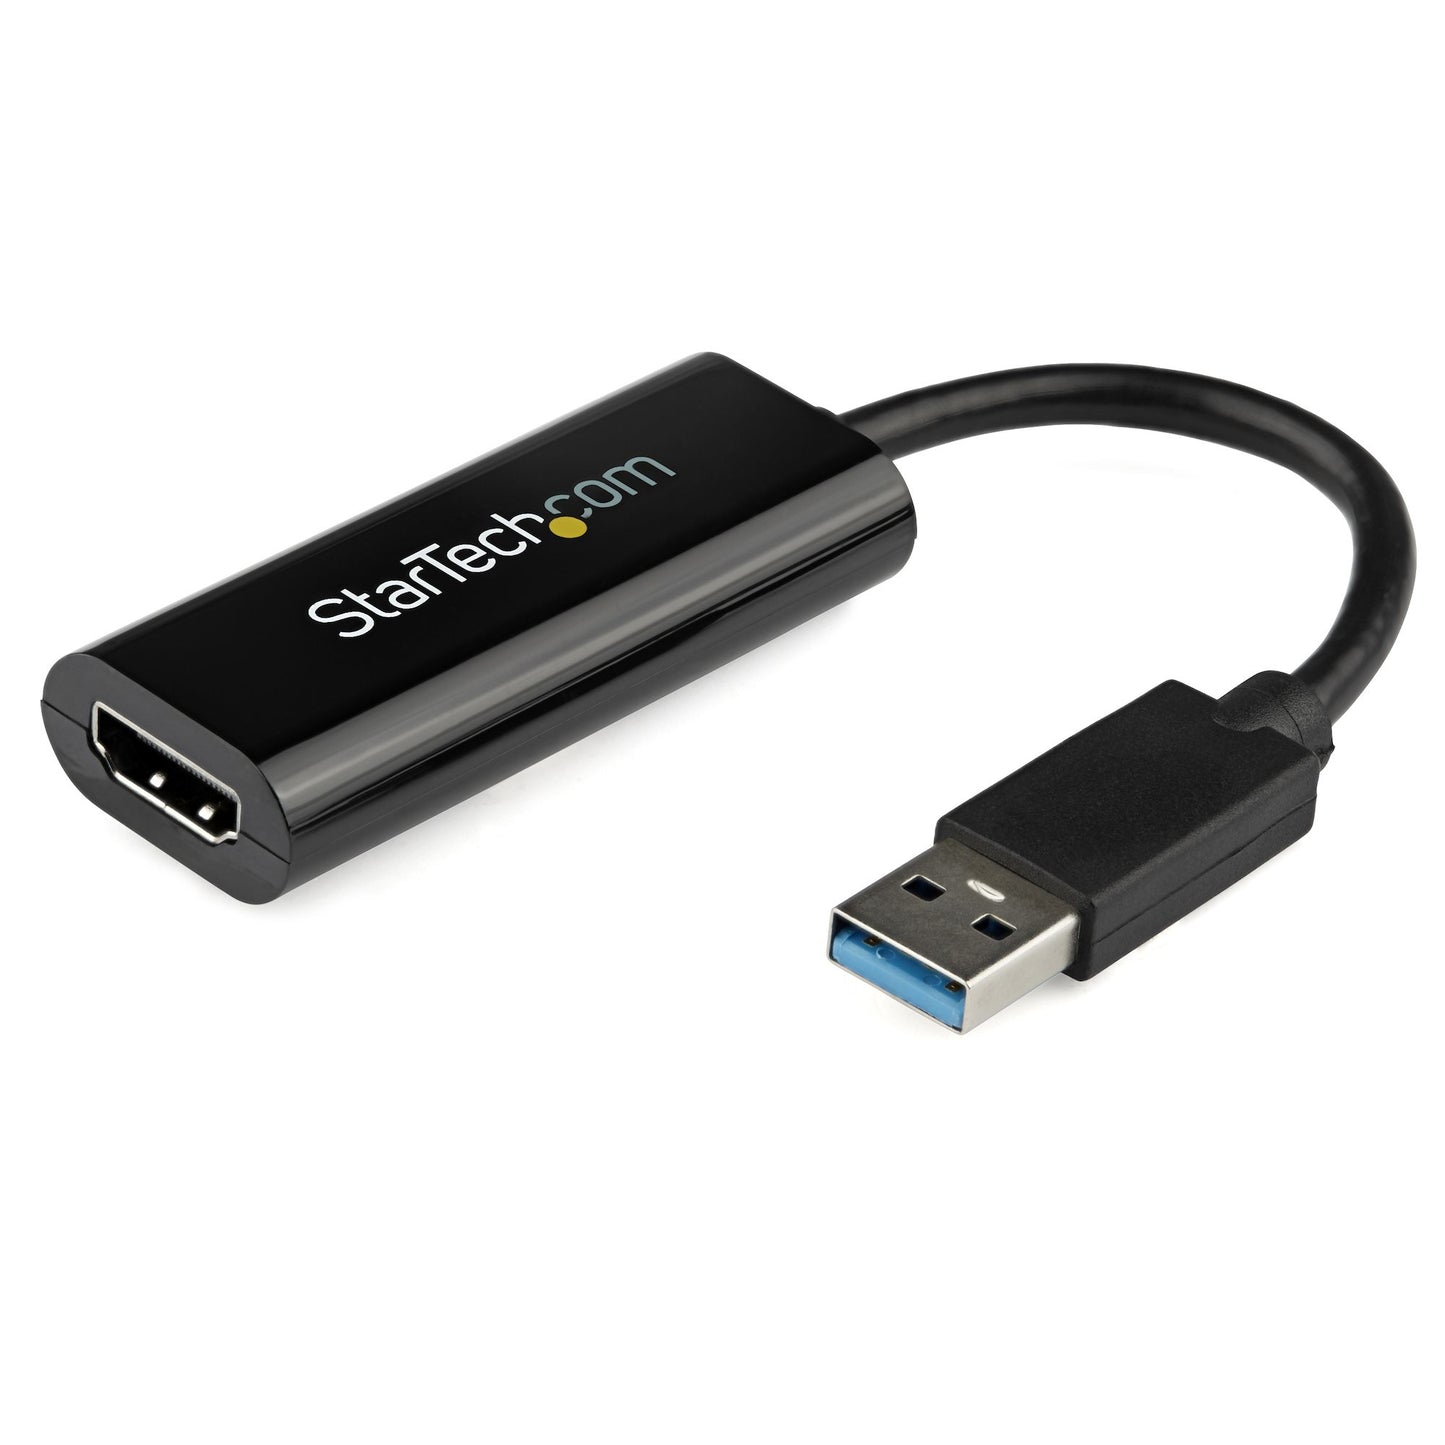 StarTech.com USB 3.0 to HDMI Adapter - 1080p (1920x1200) - Slim/Compact USB Type-A to HDMI Display Adapter Converter for Monitor - External Video & Graphics Card - Black - Windows Only-0